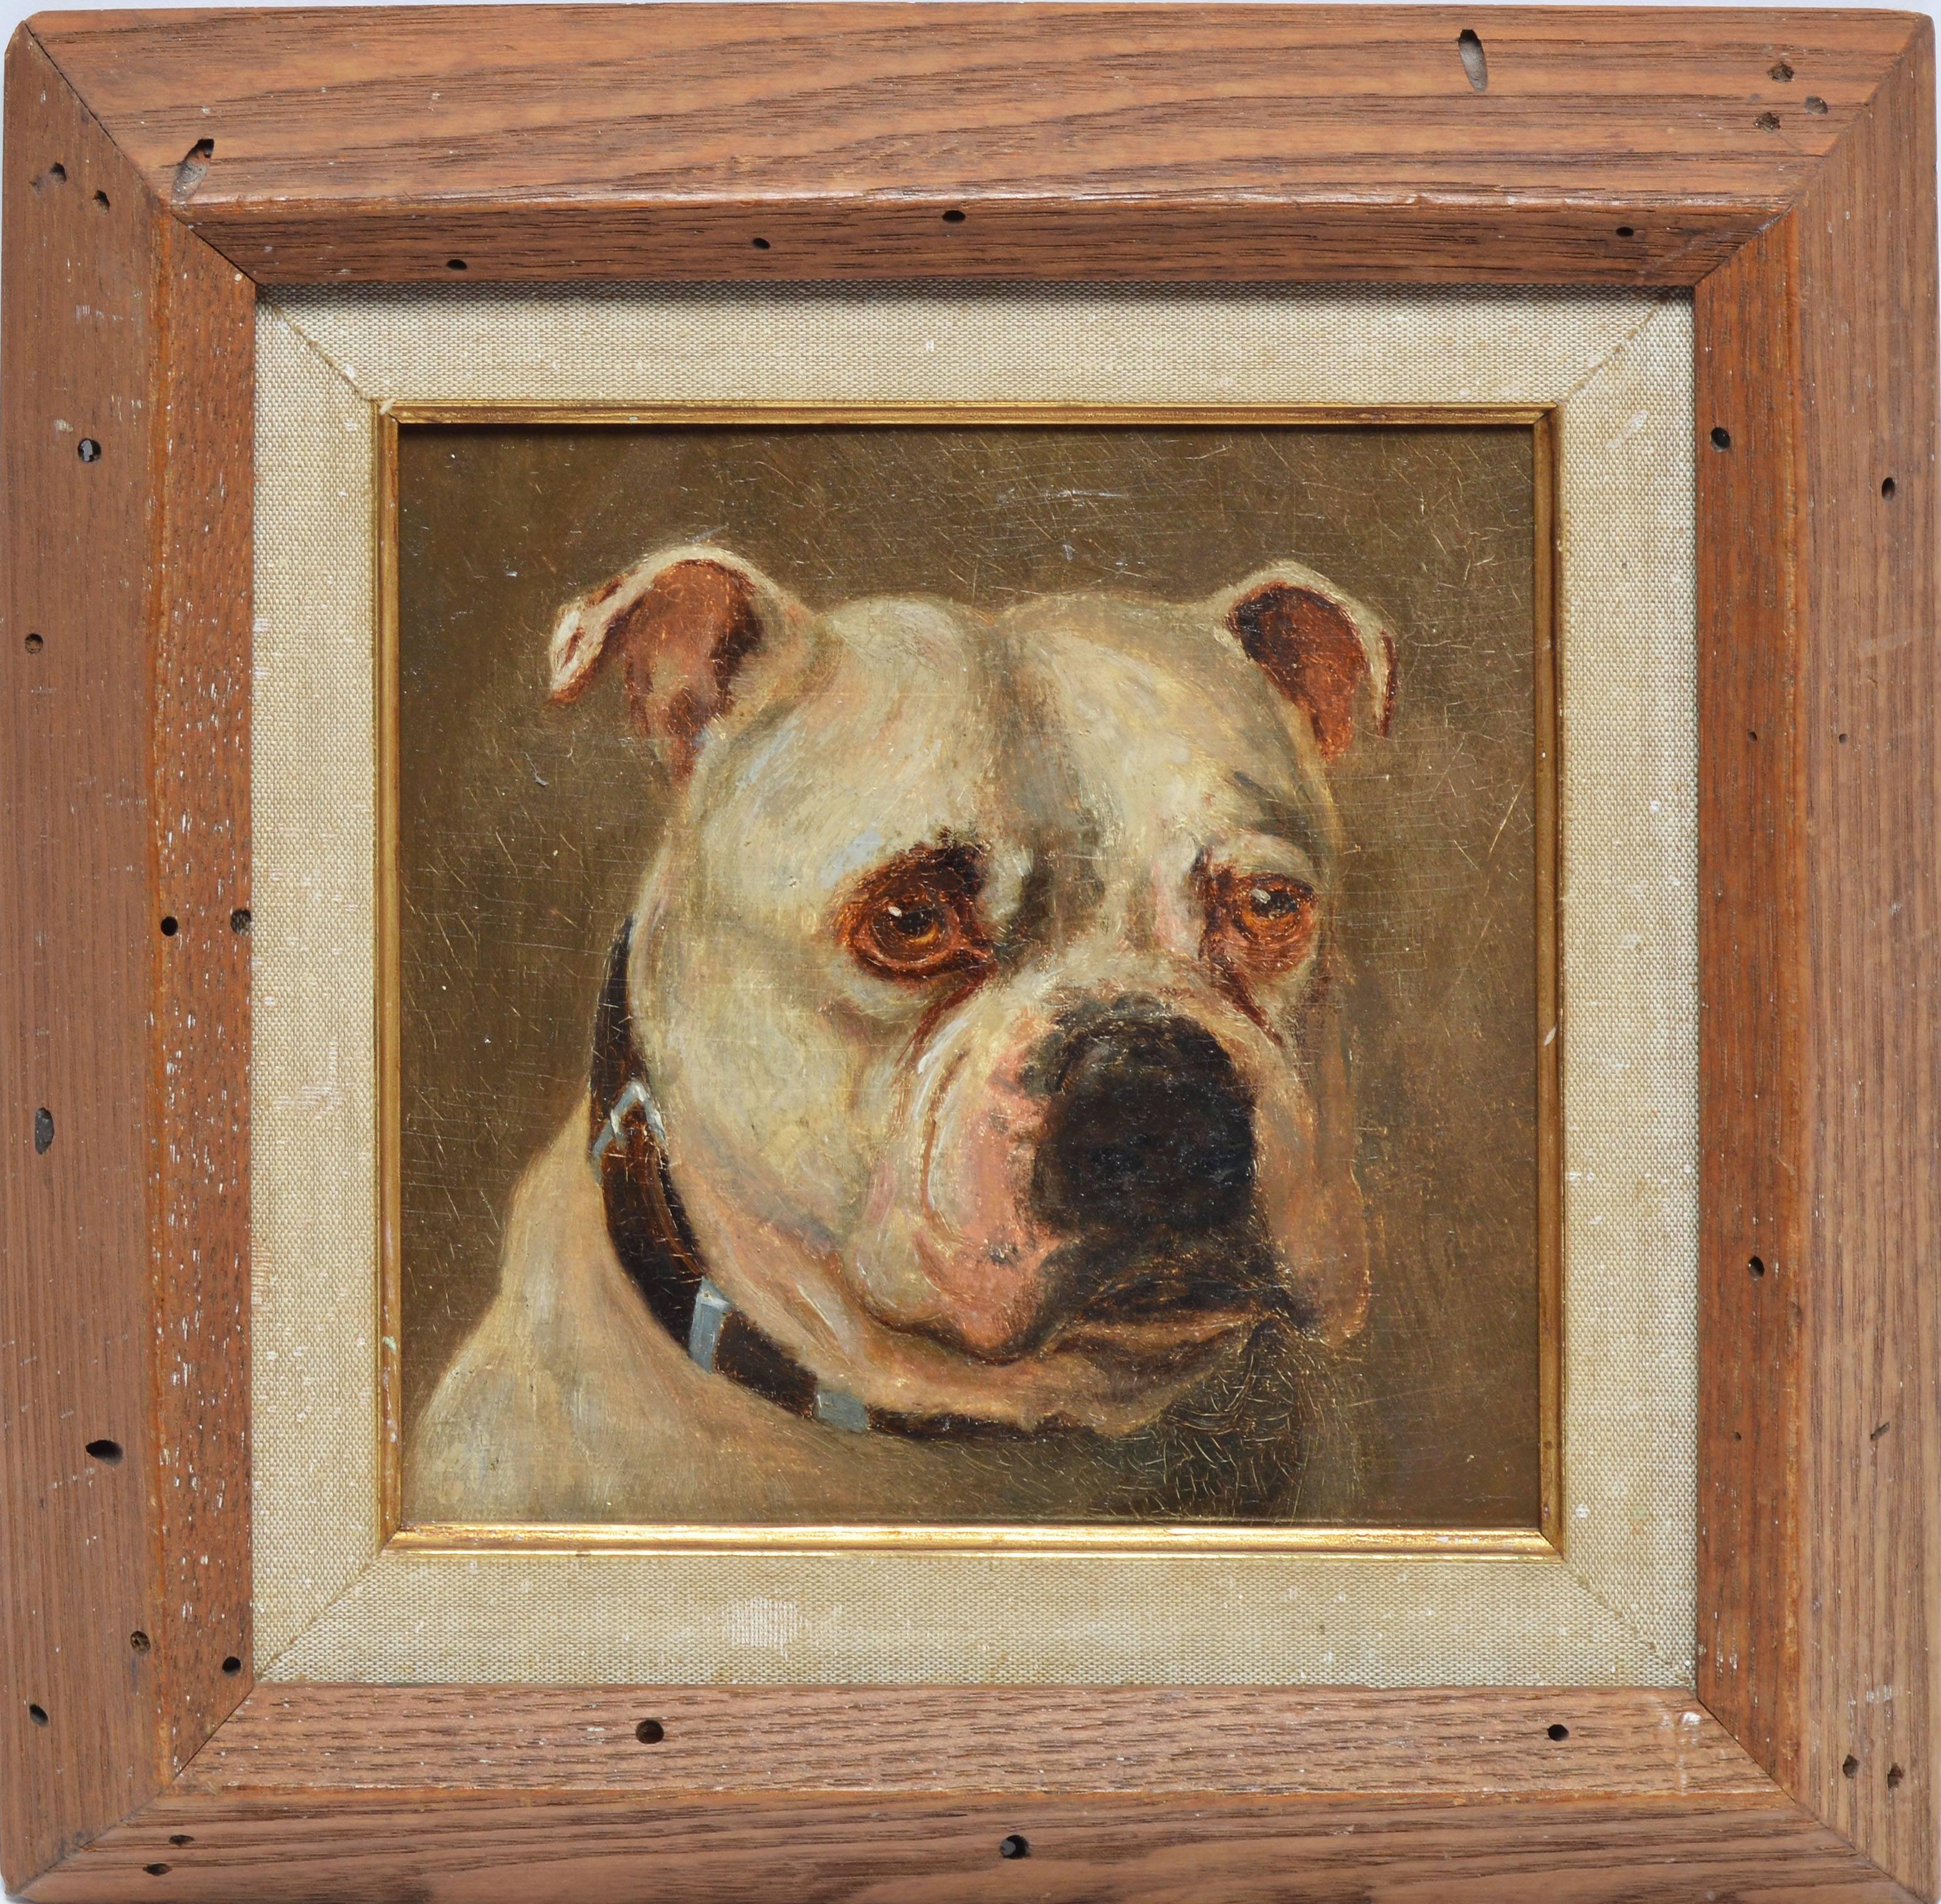 Unknown Animal Painting - 19th Century American School Portrait of a Dog